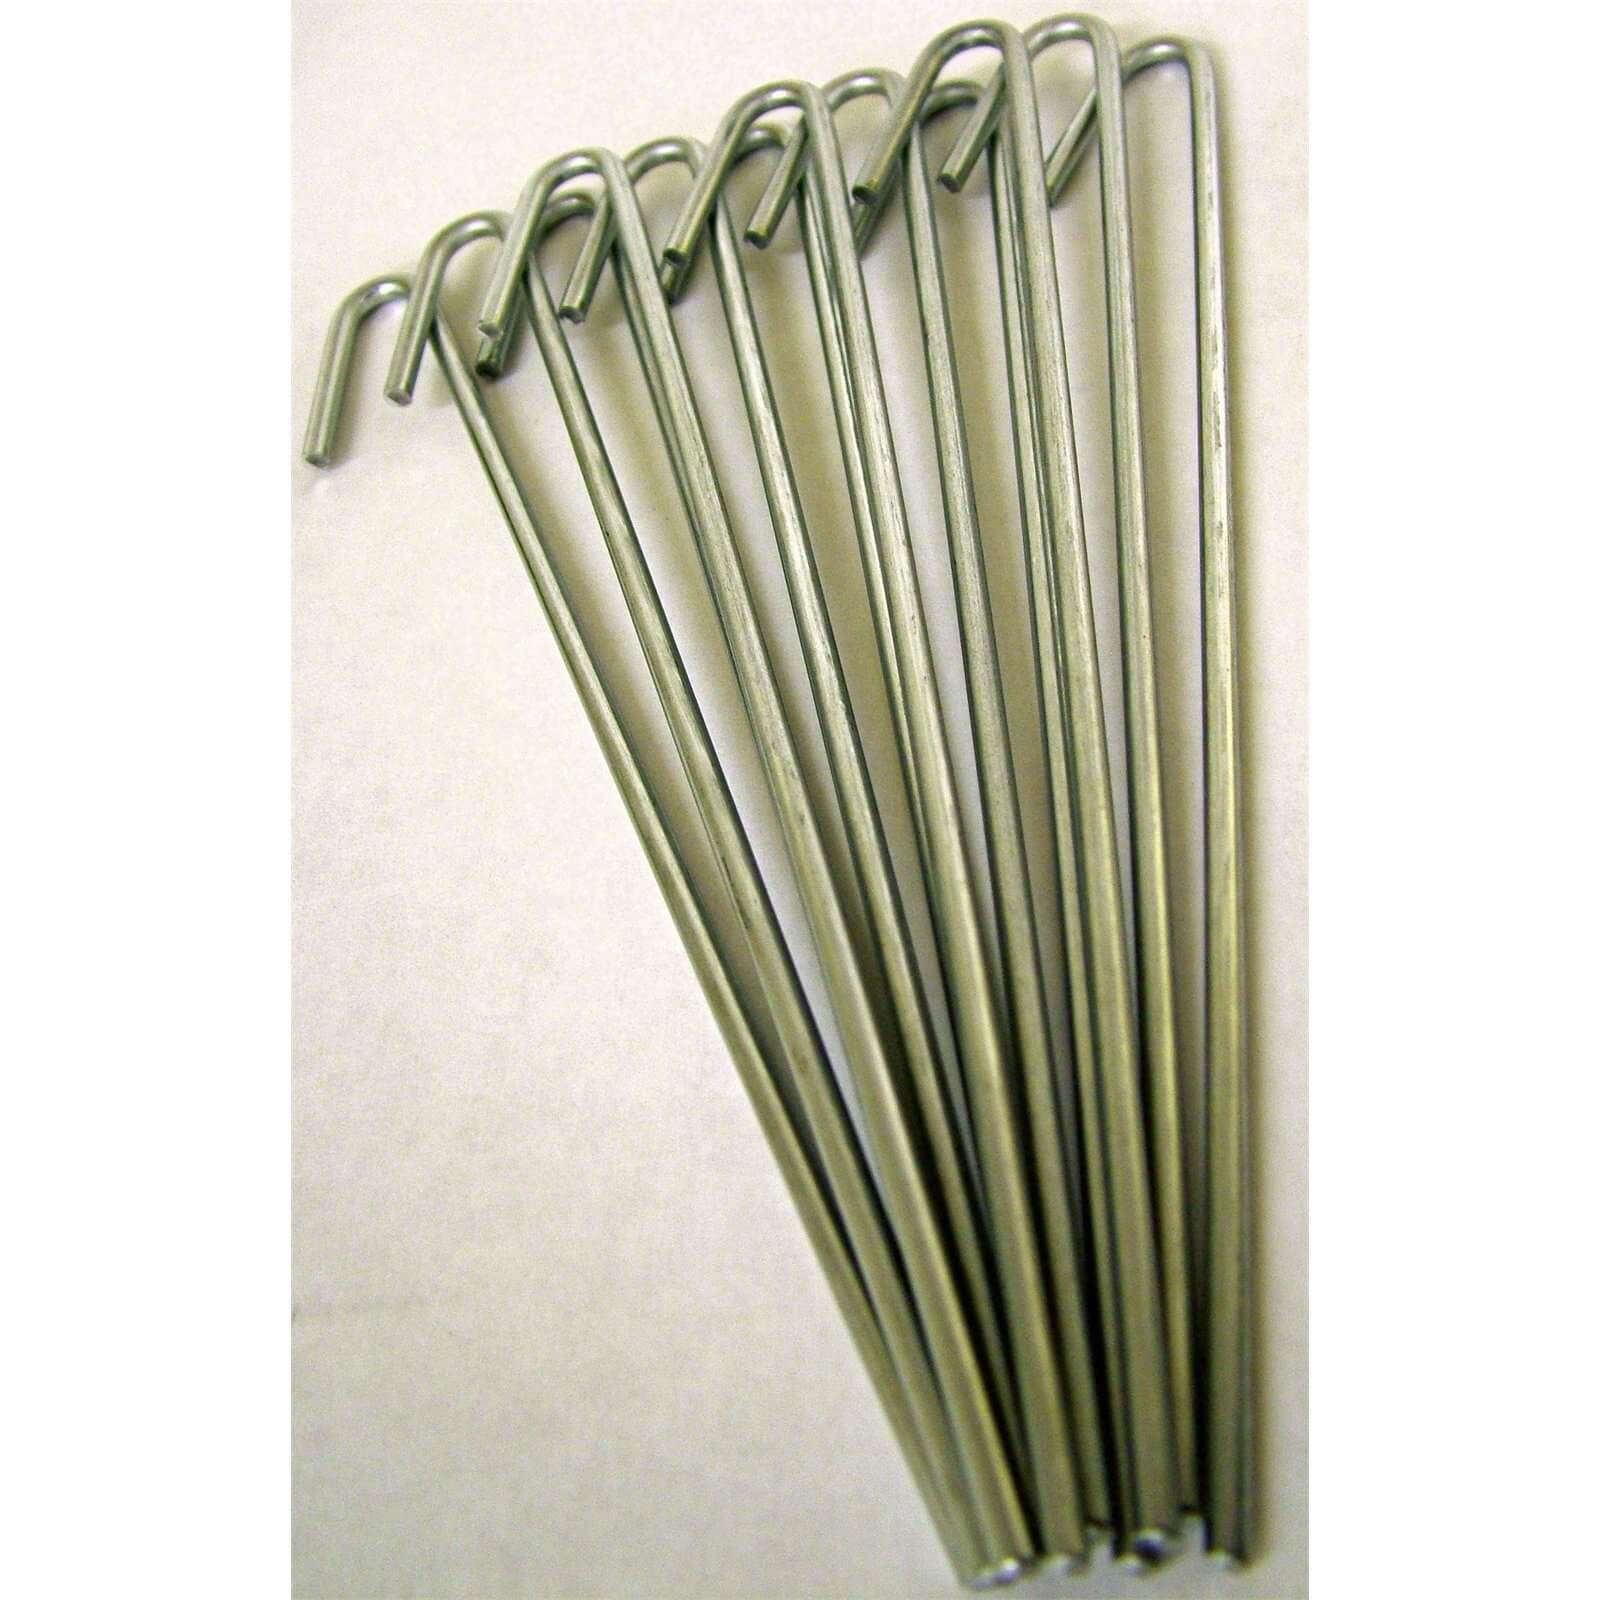 Bell Cloche Ground Pegs - 12 Pack